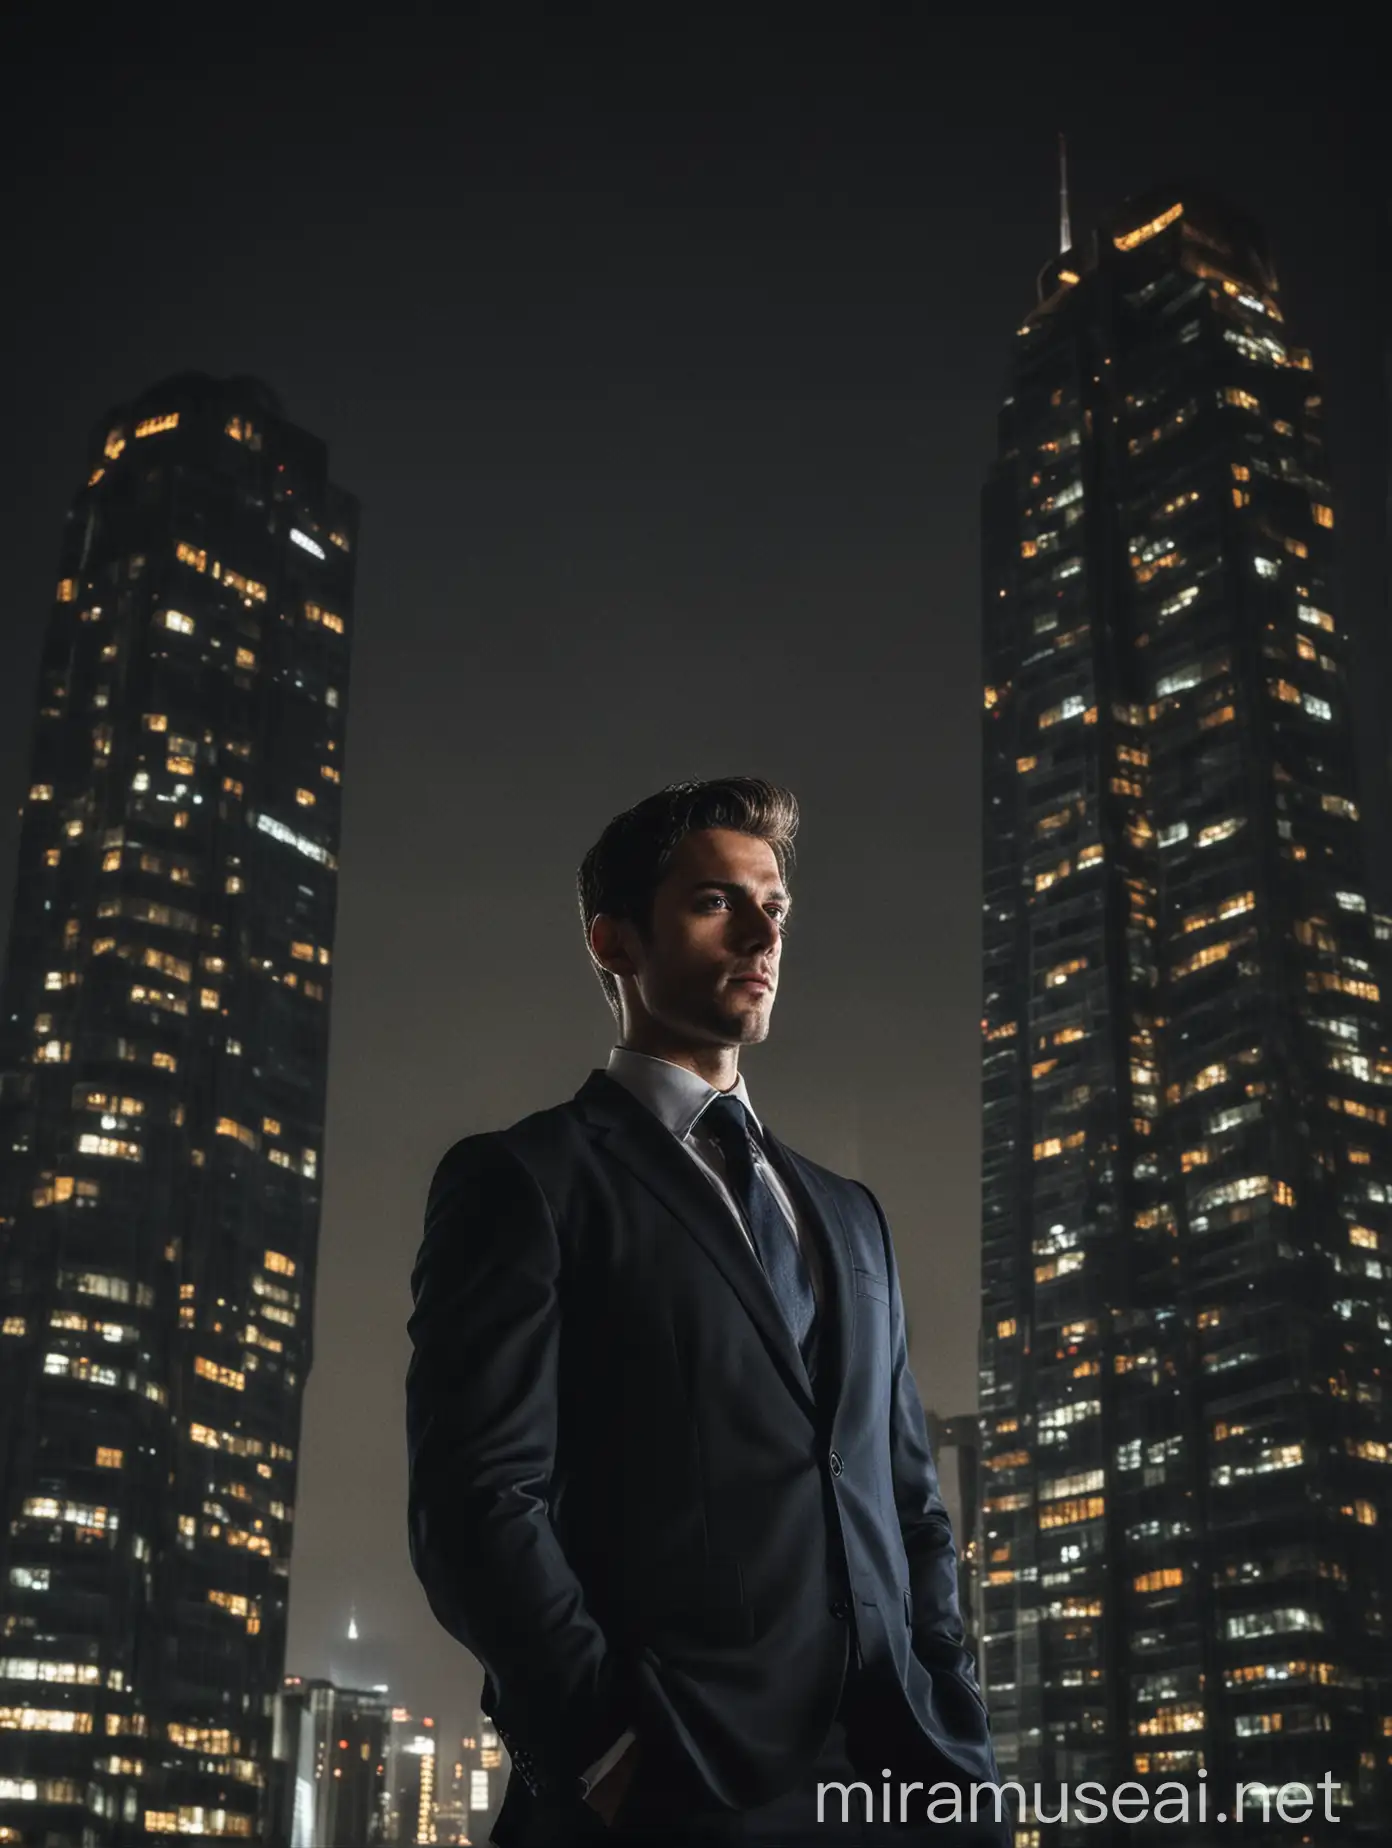 A handsome man in suit, with immerse godly lightening power surrounding him, with a skyscraper behind, in the dark night